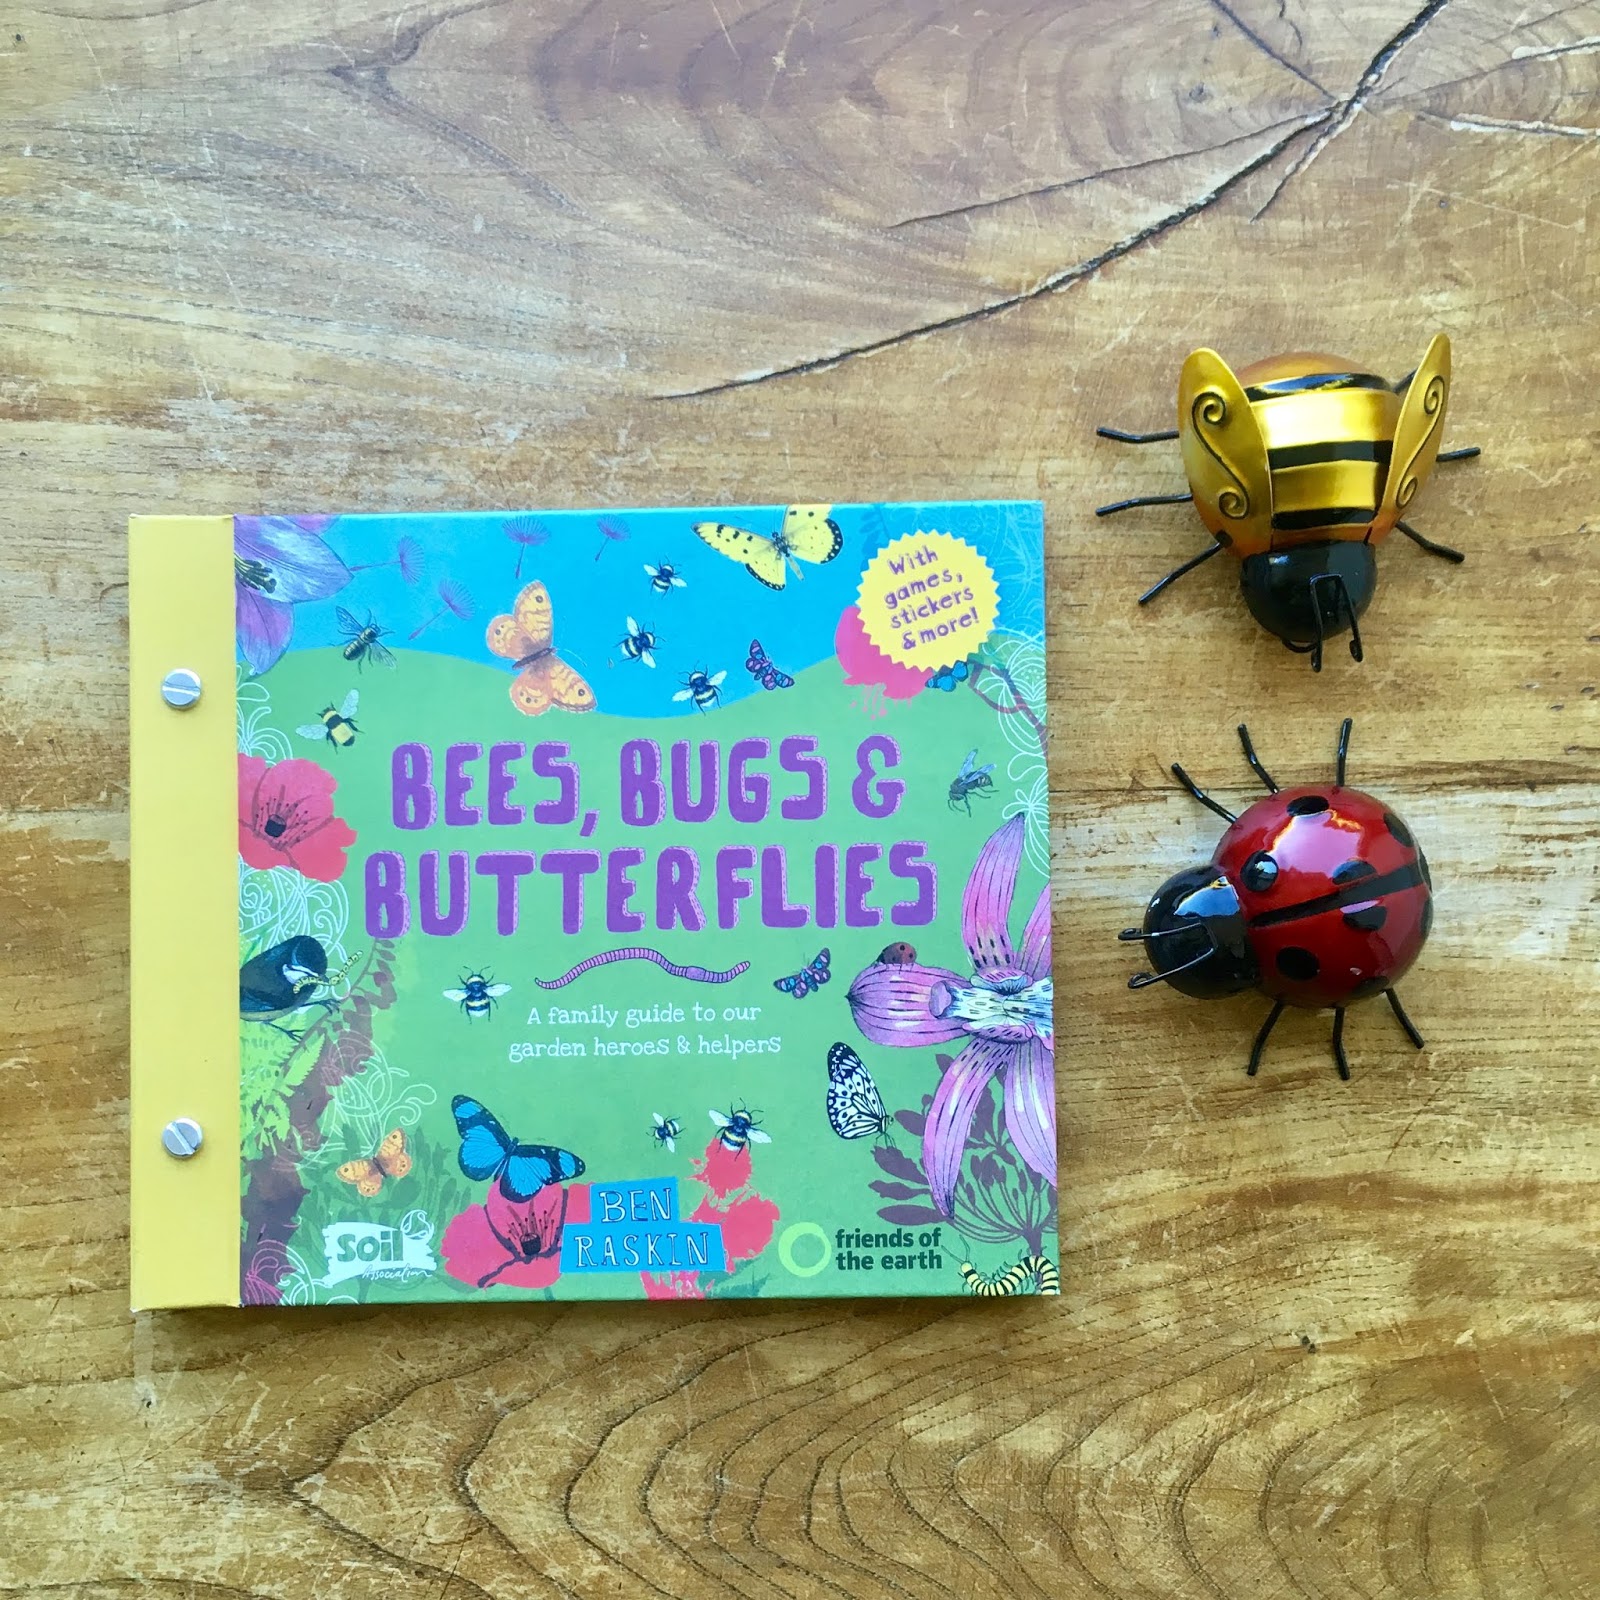 A Family Guide to Our Garden Heroes and Helpers and Butterflies Bugs Bees 